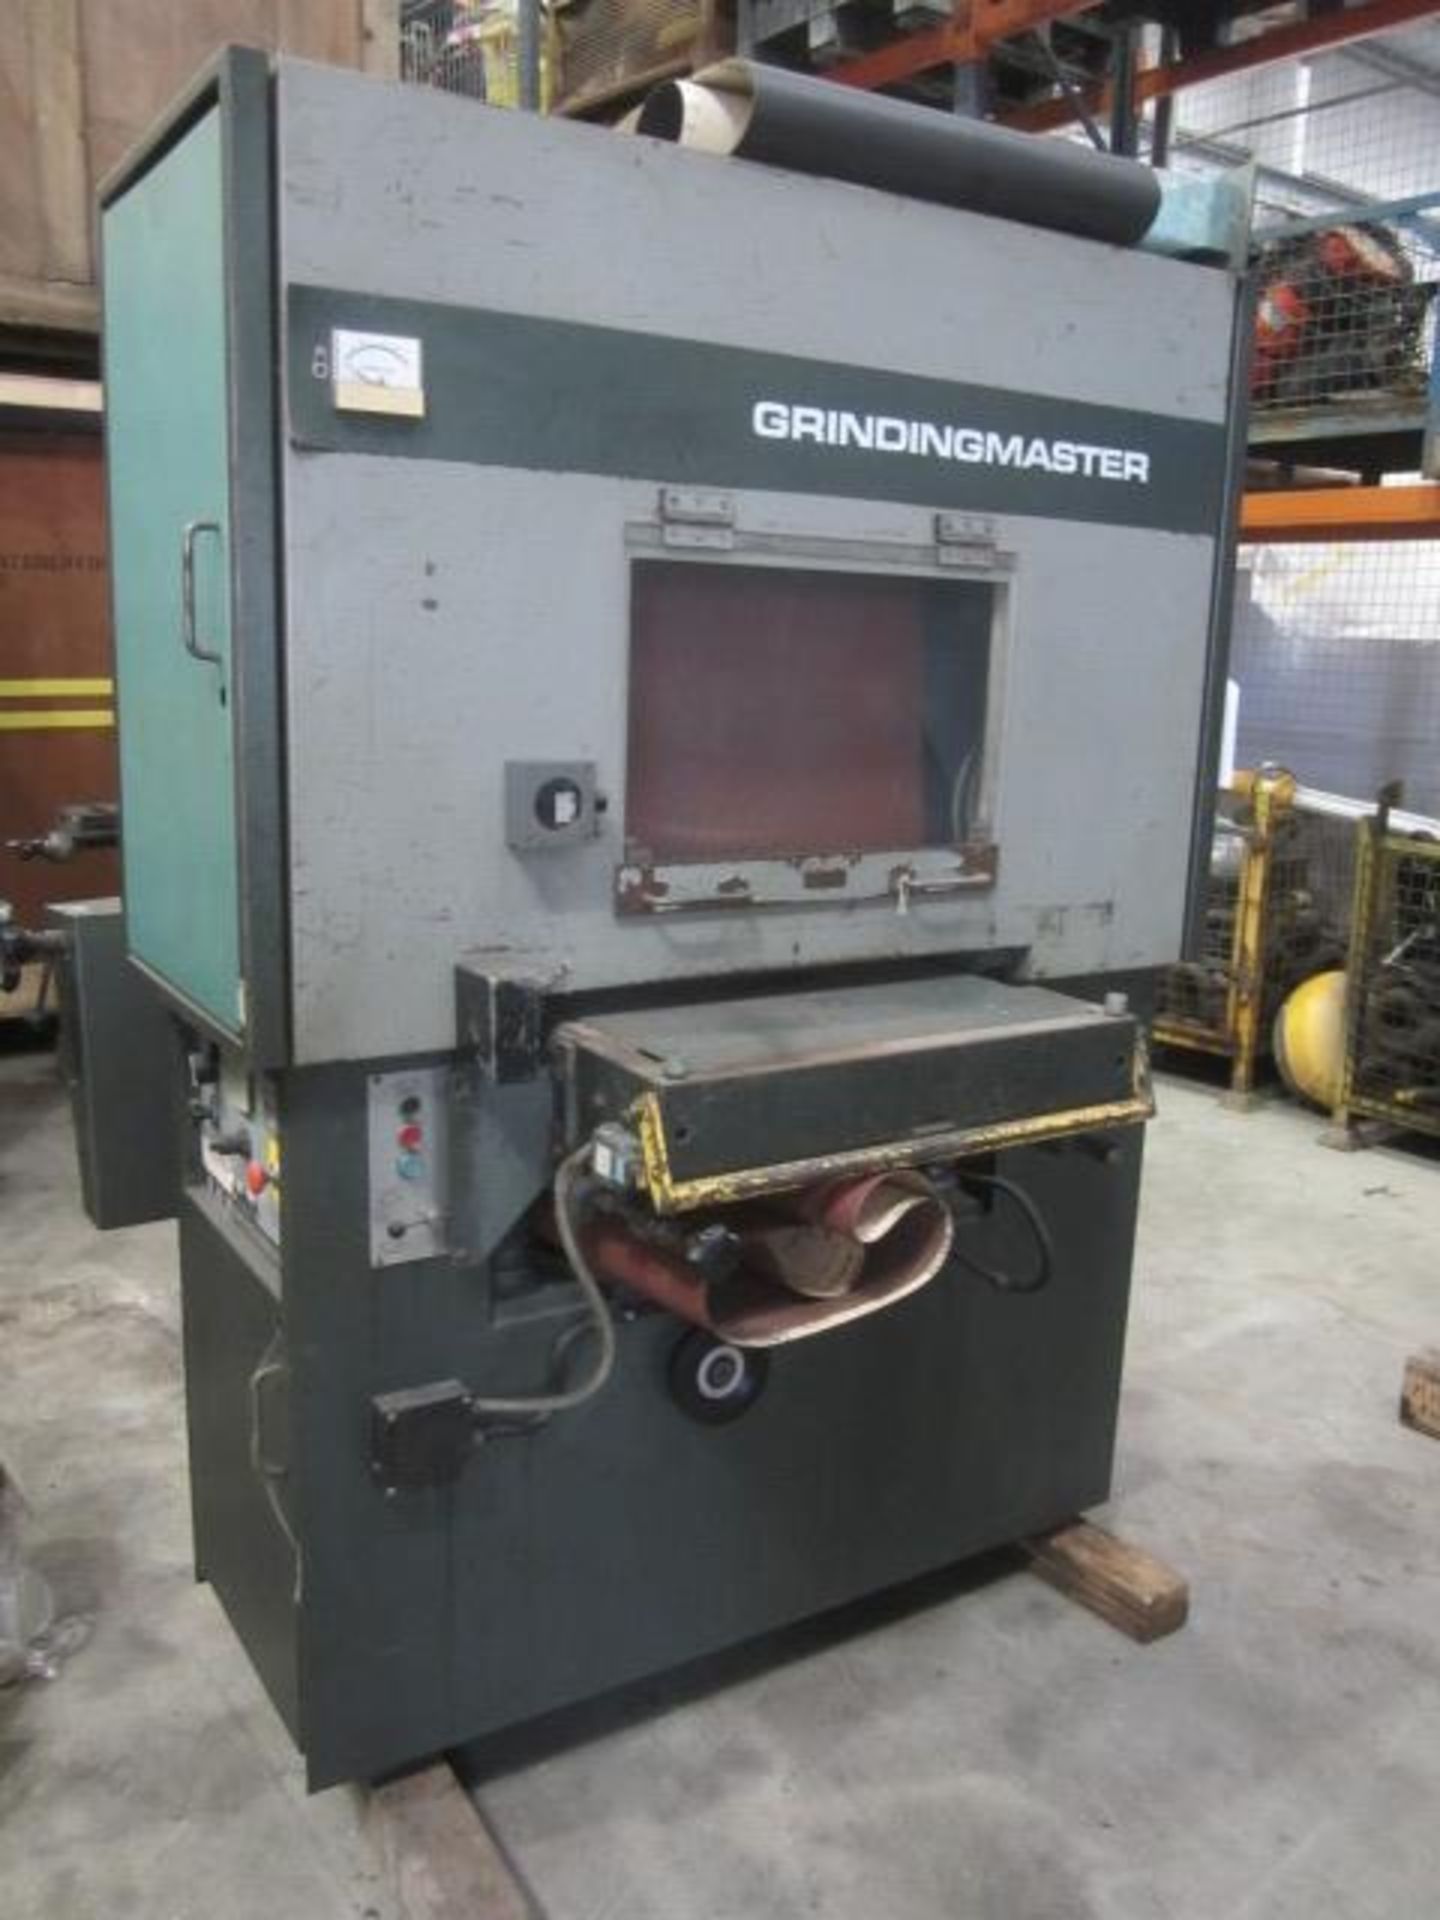 Grinding Master 600mm through feed belt sander, type MCSB-600, serial no. R15103 - for spares or - Image 3 of 7